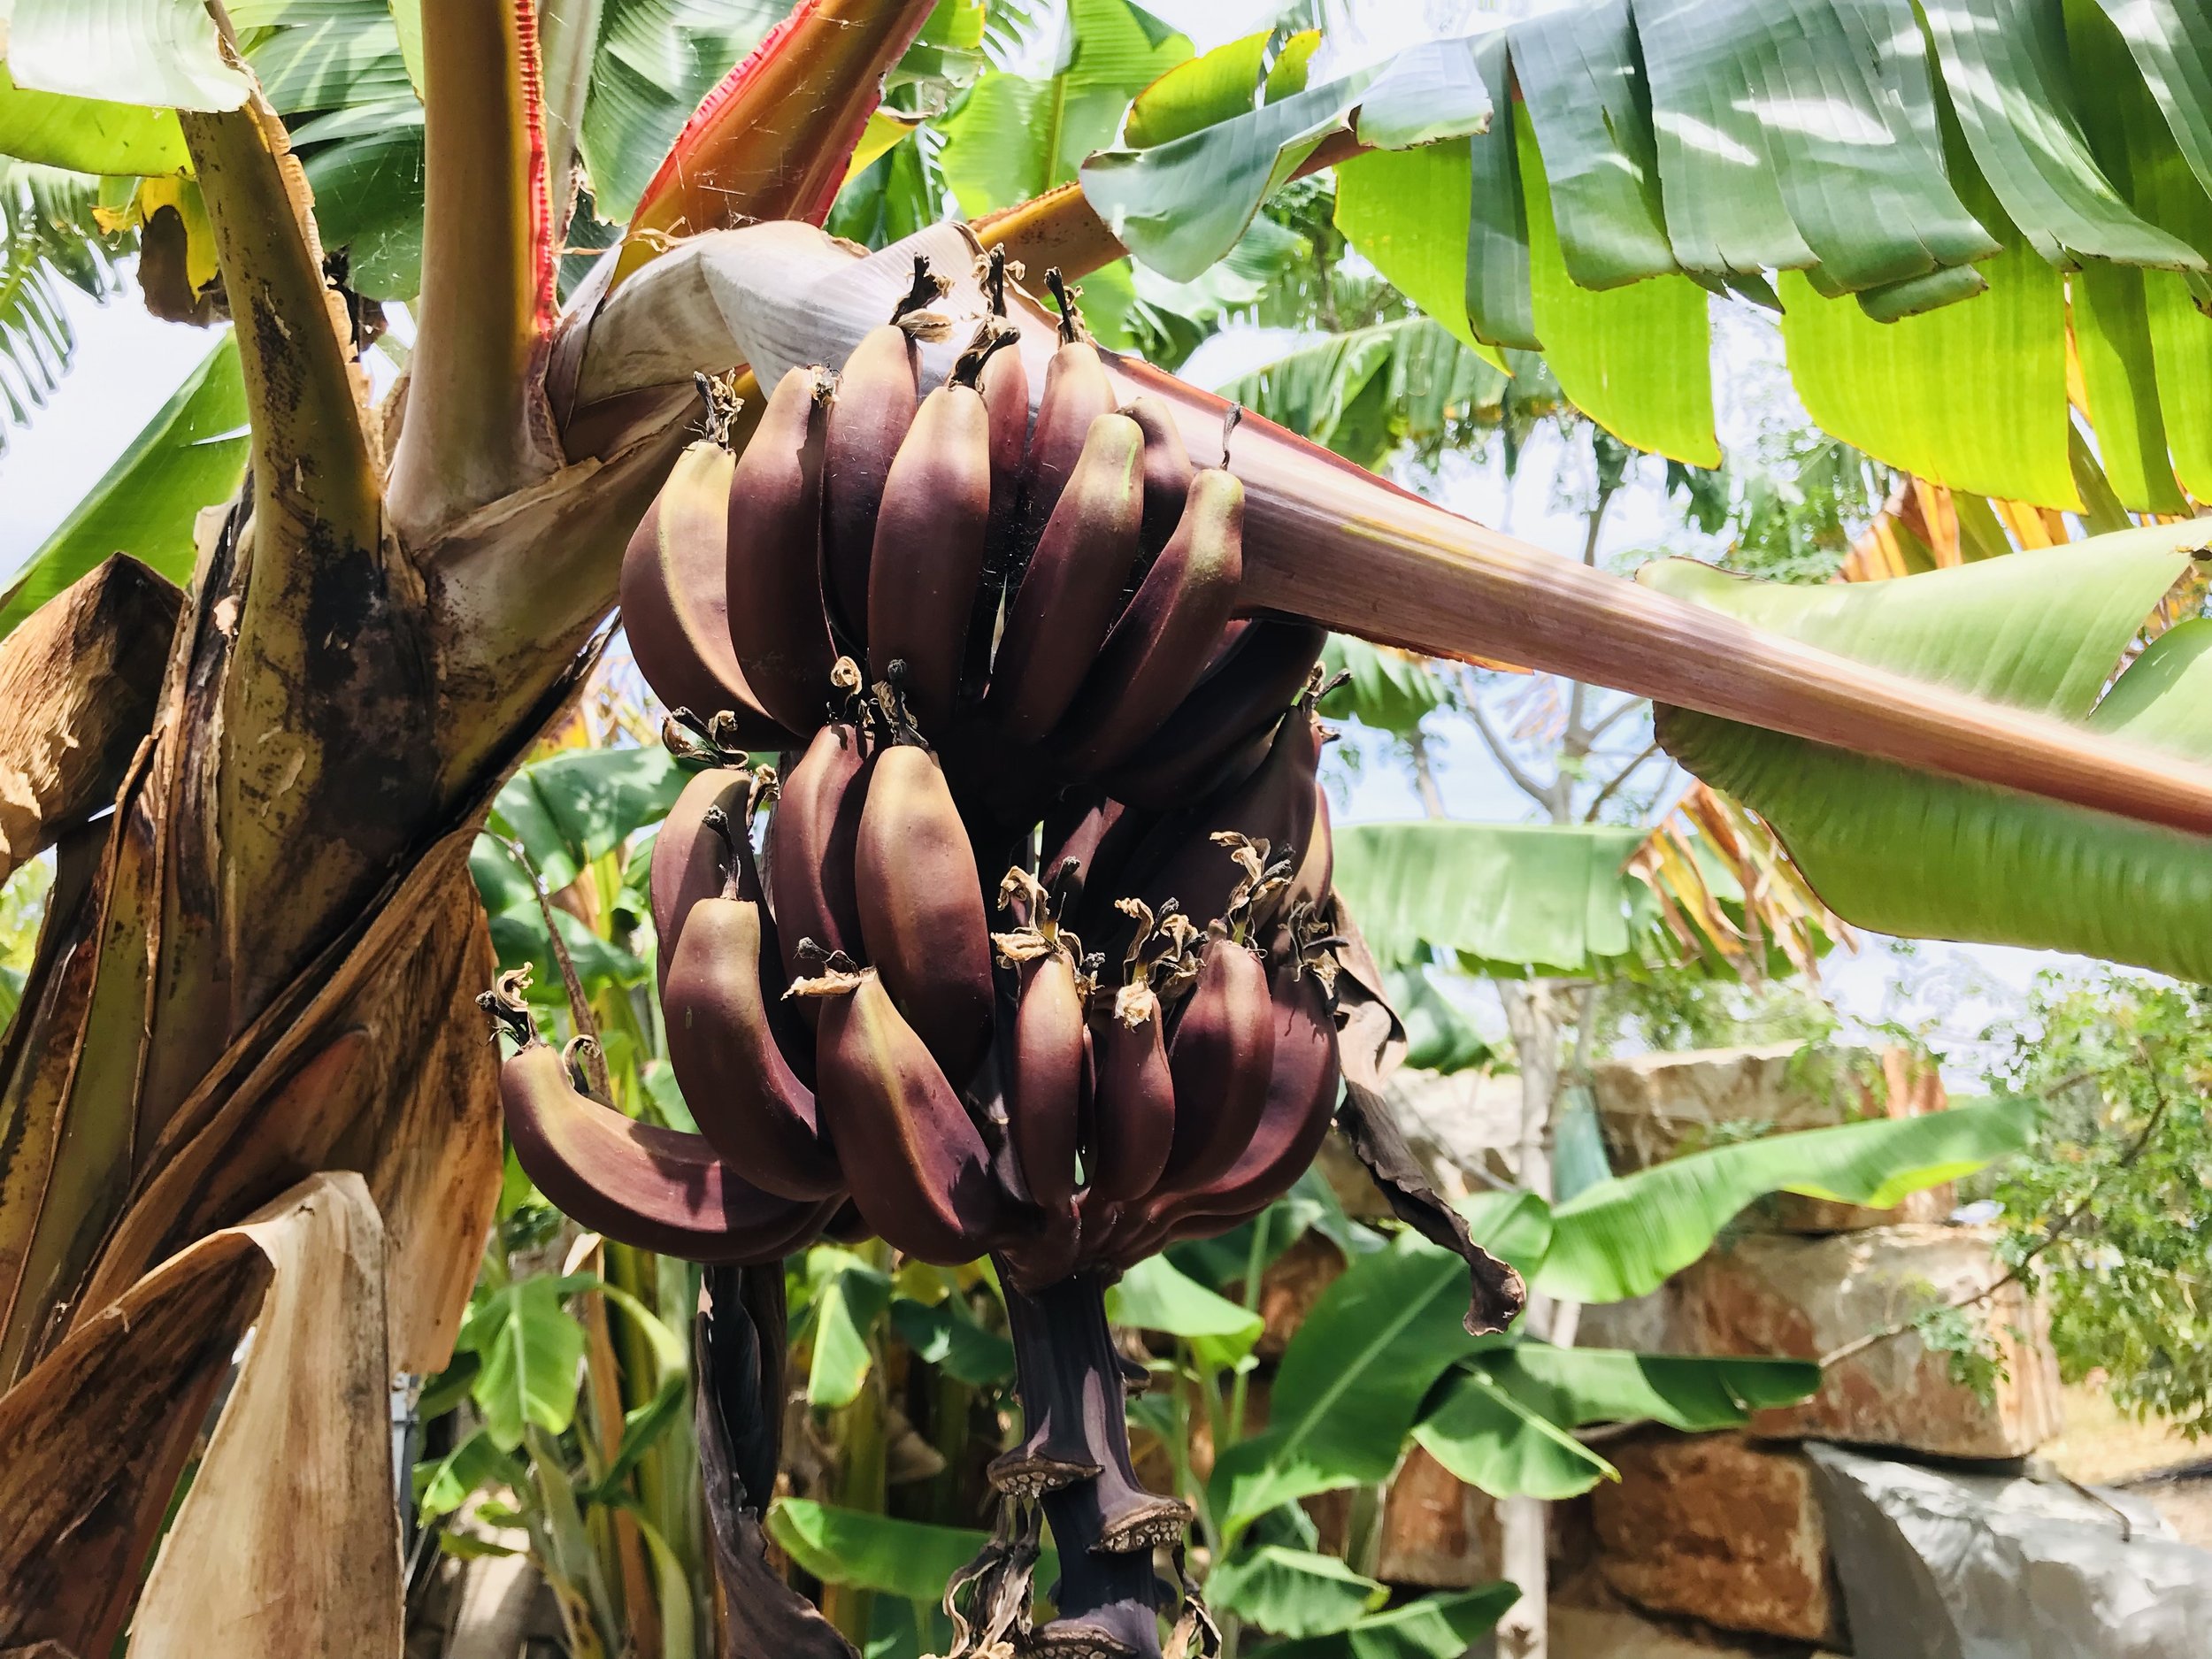 Bunch of red bananas